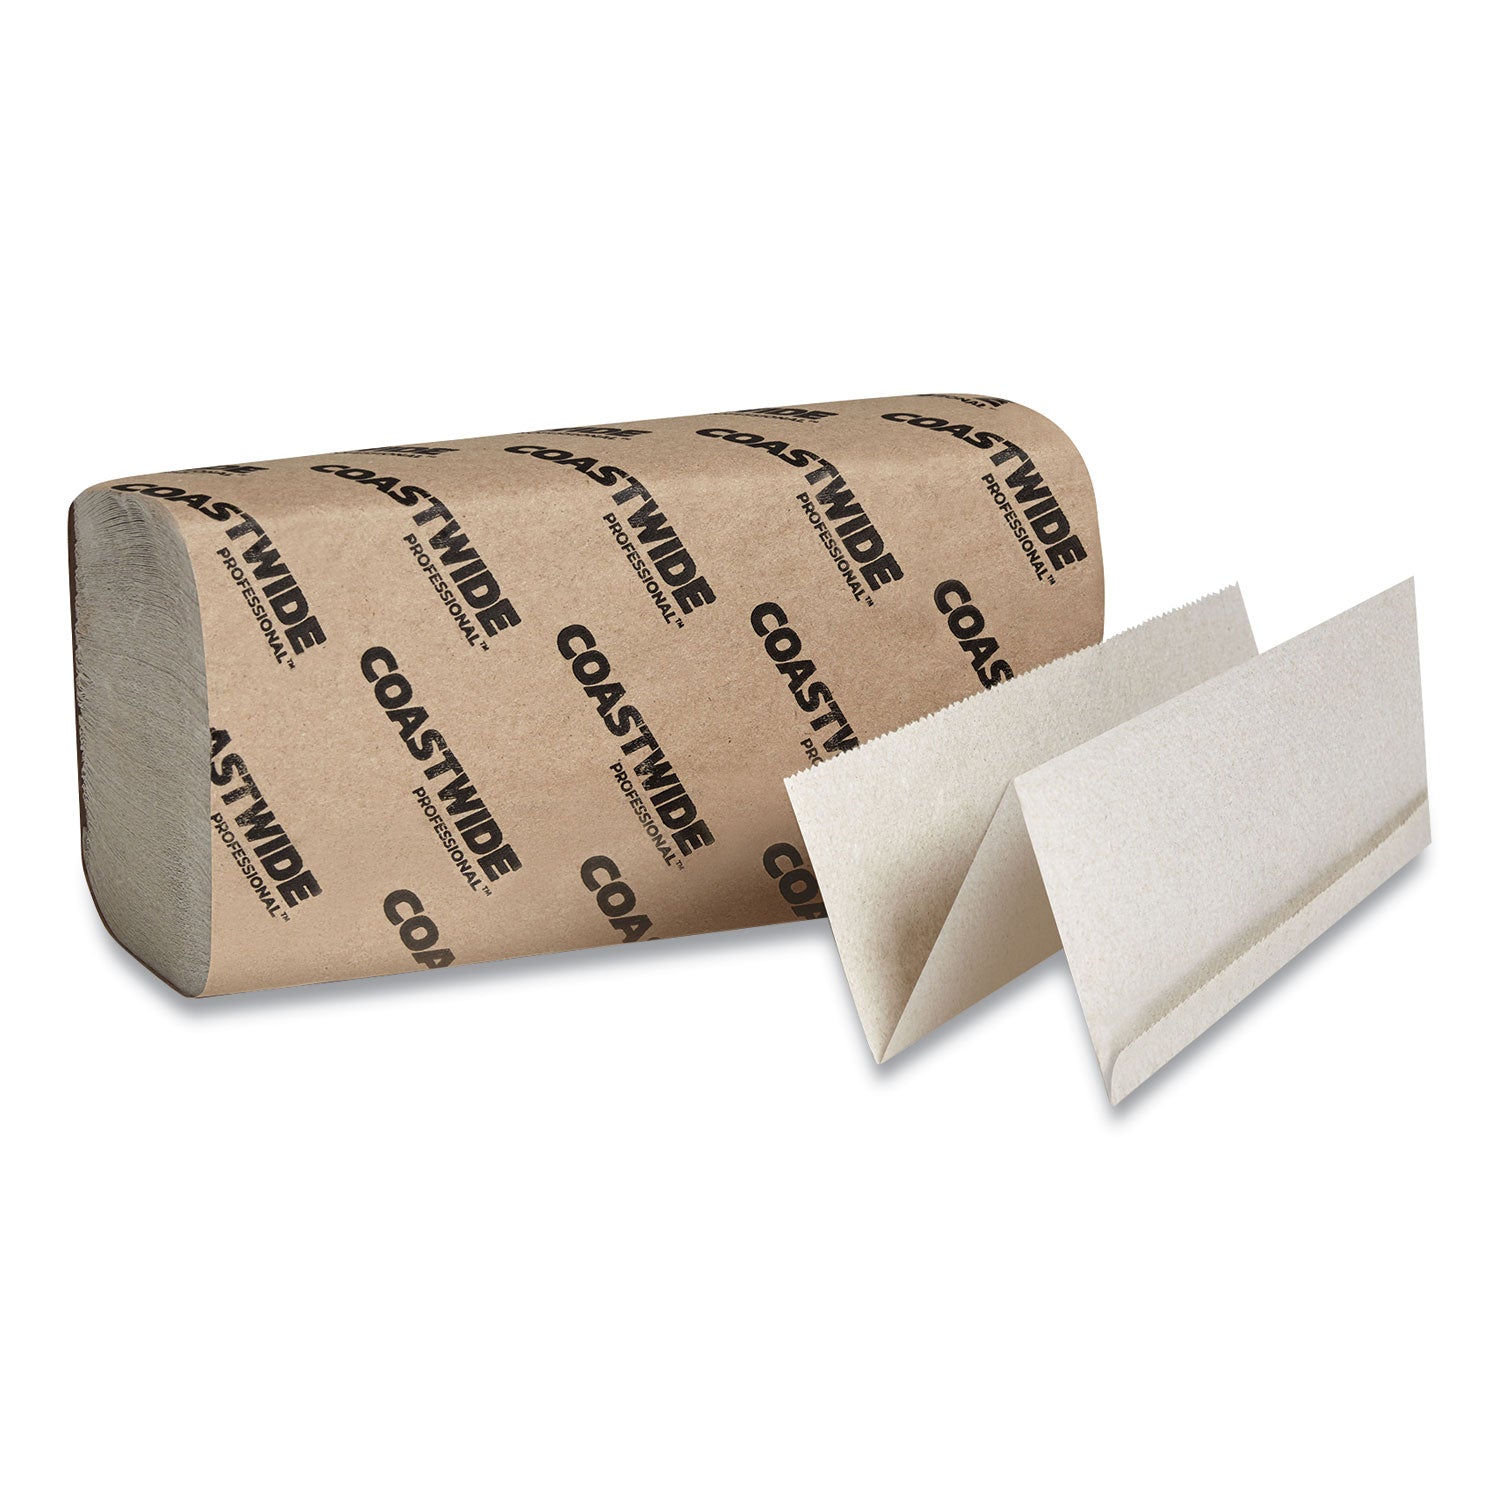 recycled-multi-fold-paper-towels-1-ply-95-x-925-natural-kraft-250-sheets-pack-16-packs-carton_cwz887854 - 1